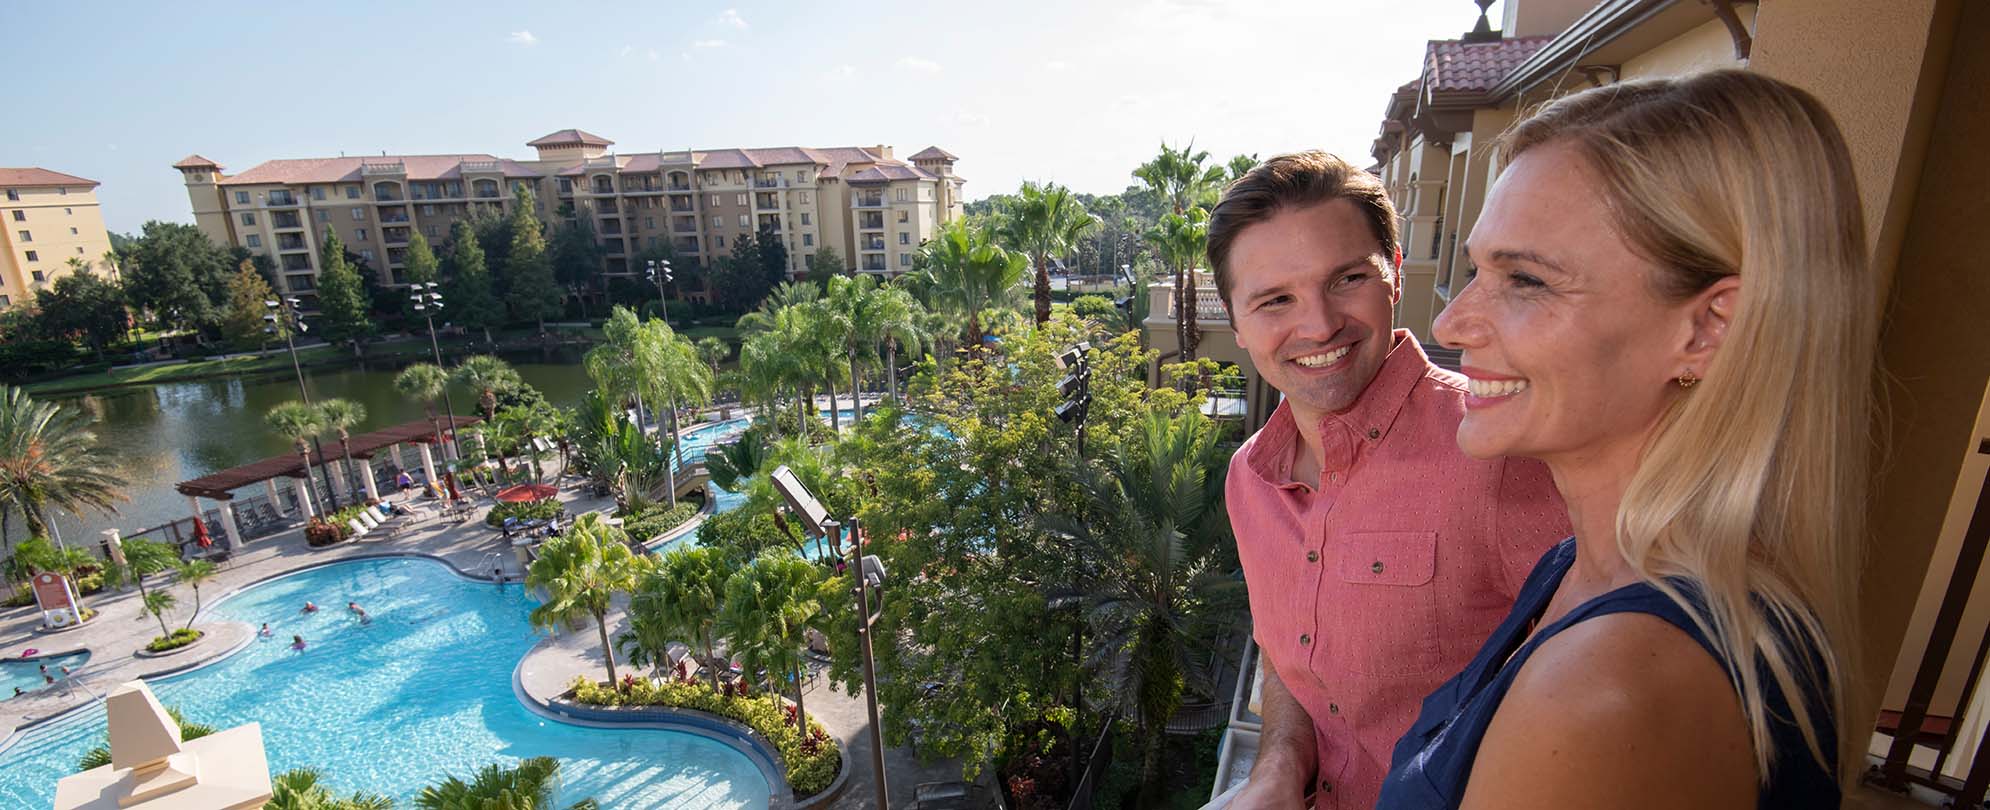 A smiling couple stands on a suite balcony overlooking the pool and lazy river at Club Wyndham Bonnet Creek in Orlando, FL.